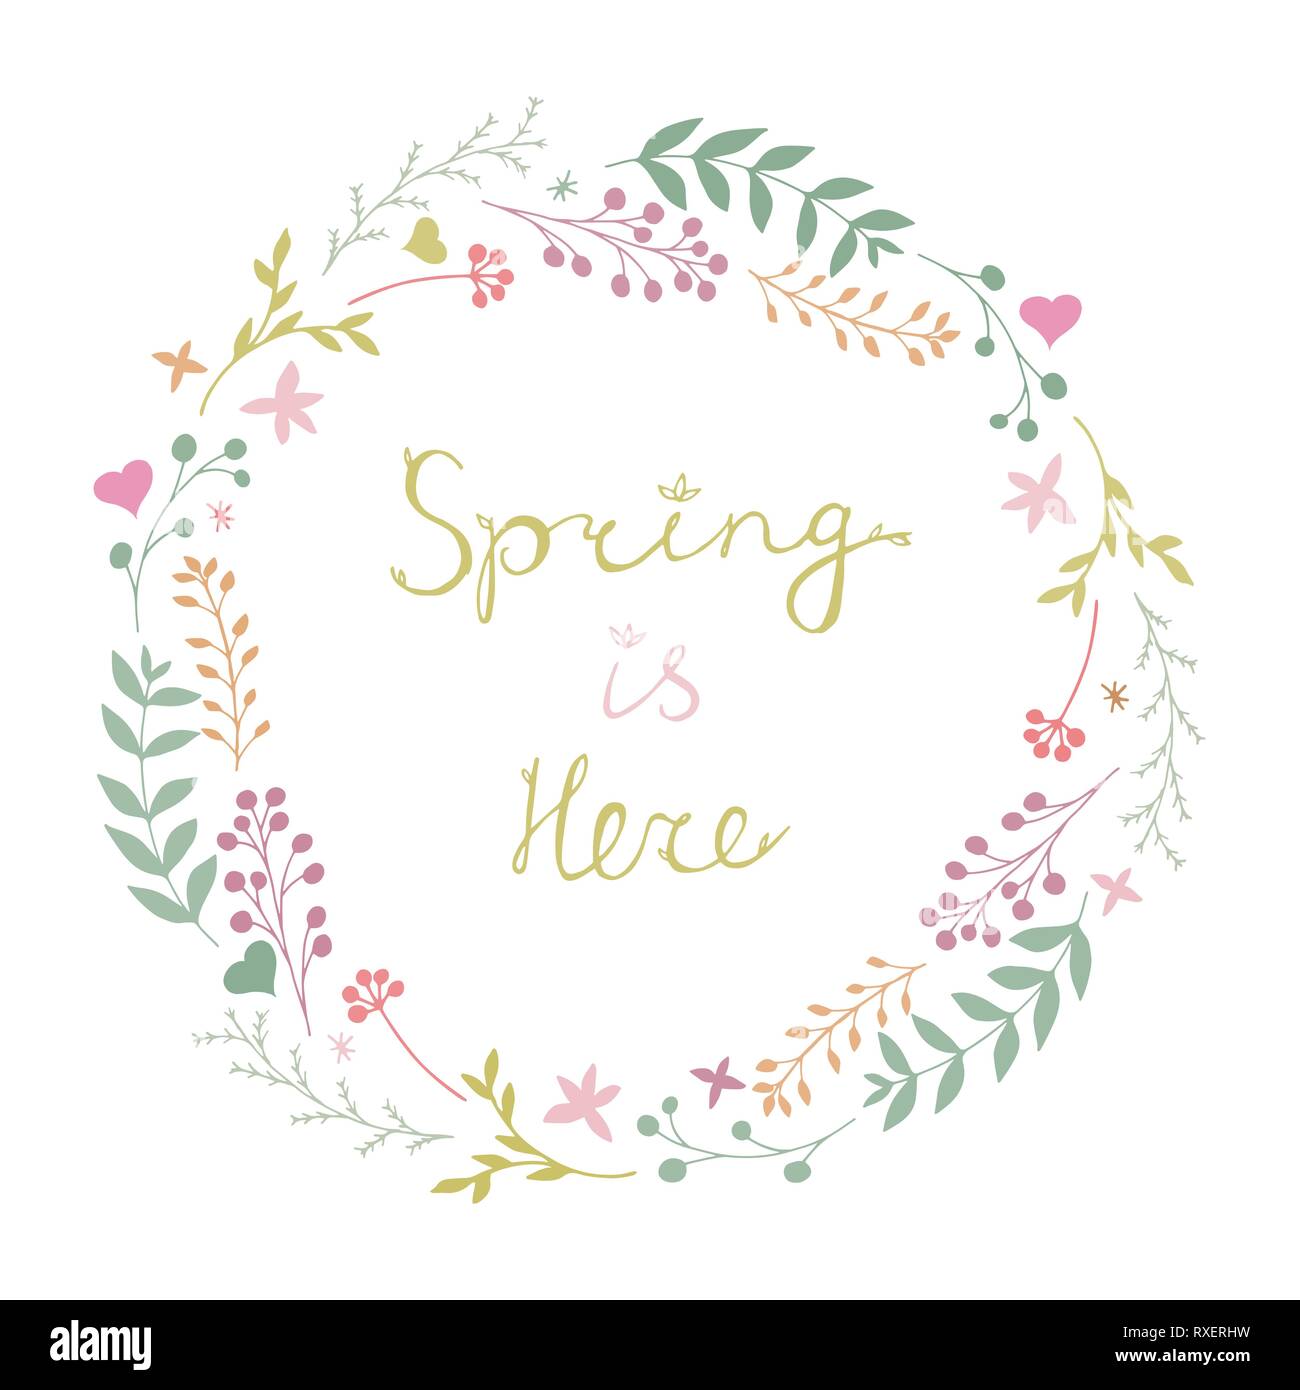 Beautiful vector floral spring wreath in gentle colors isolated on white background. Spring Is Here lettering. Botanical round garland. Stock Vector